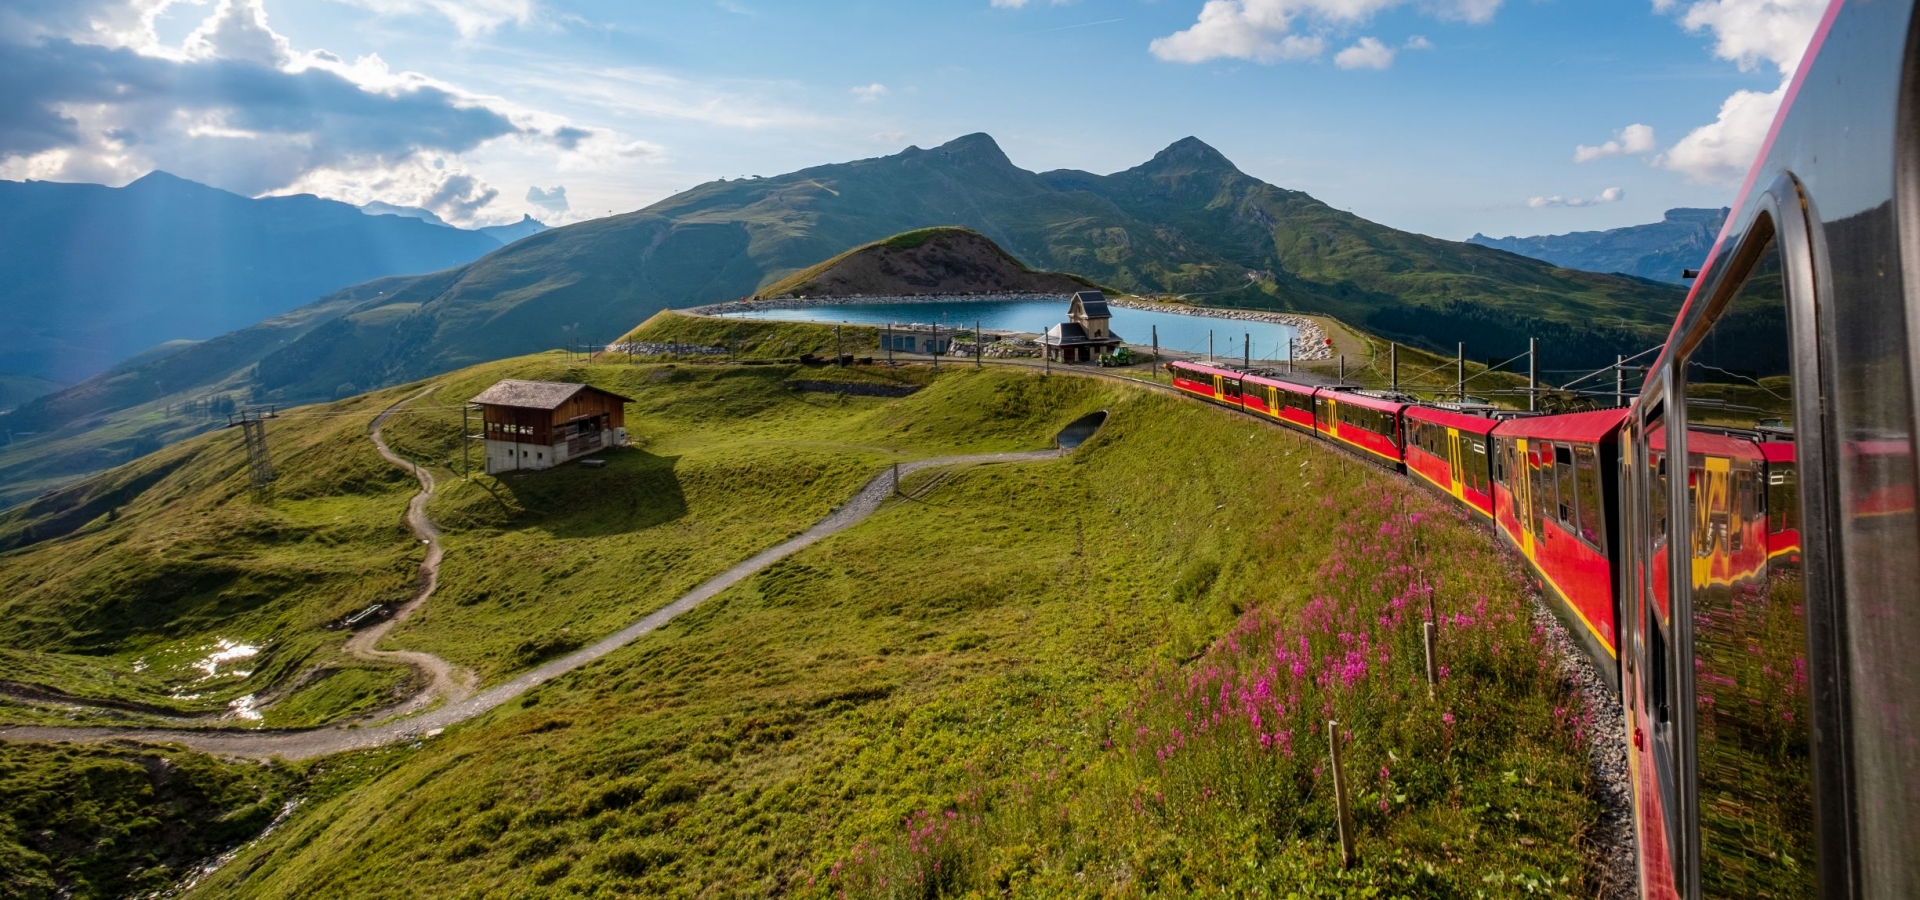 A train travels down a mountainside in summer